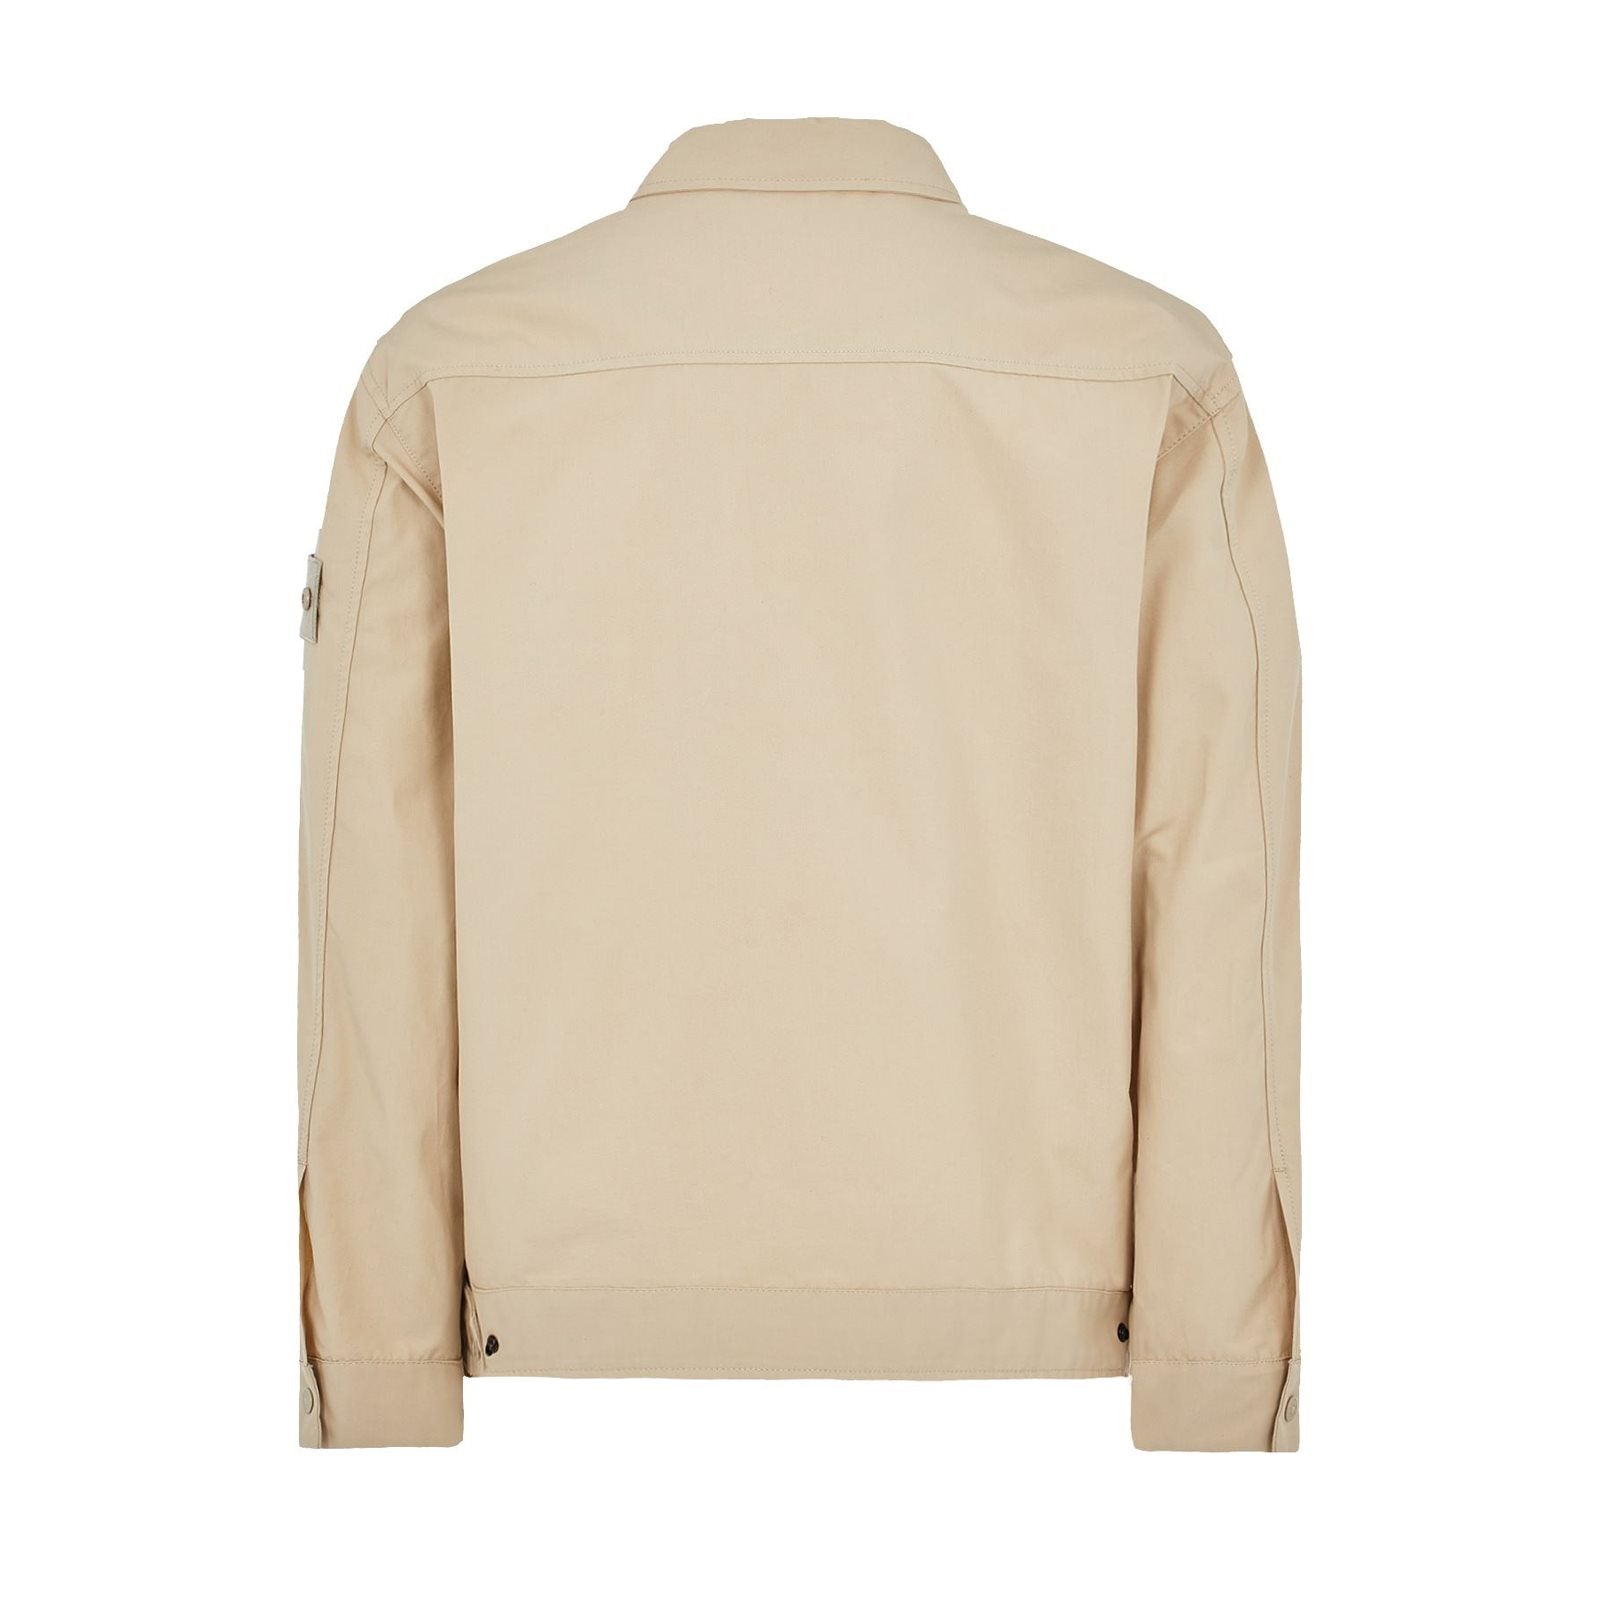 O-ventile ghost jacket